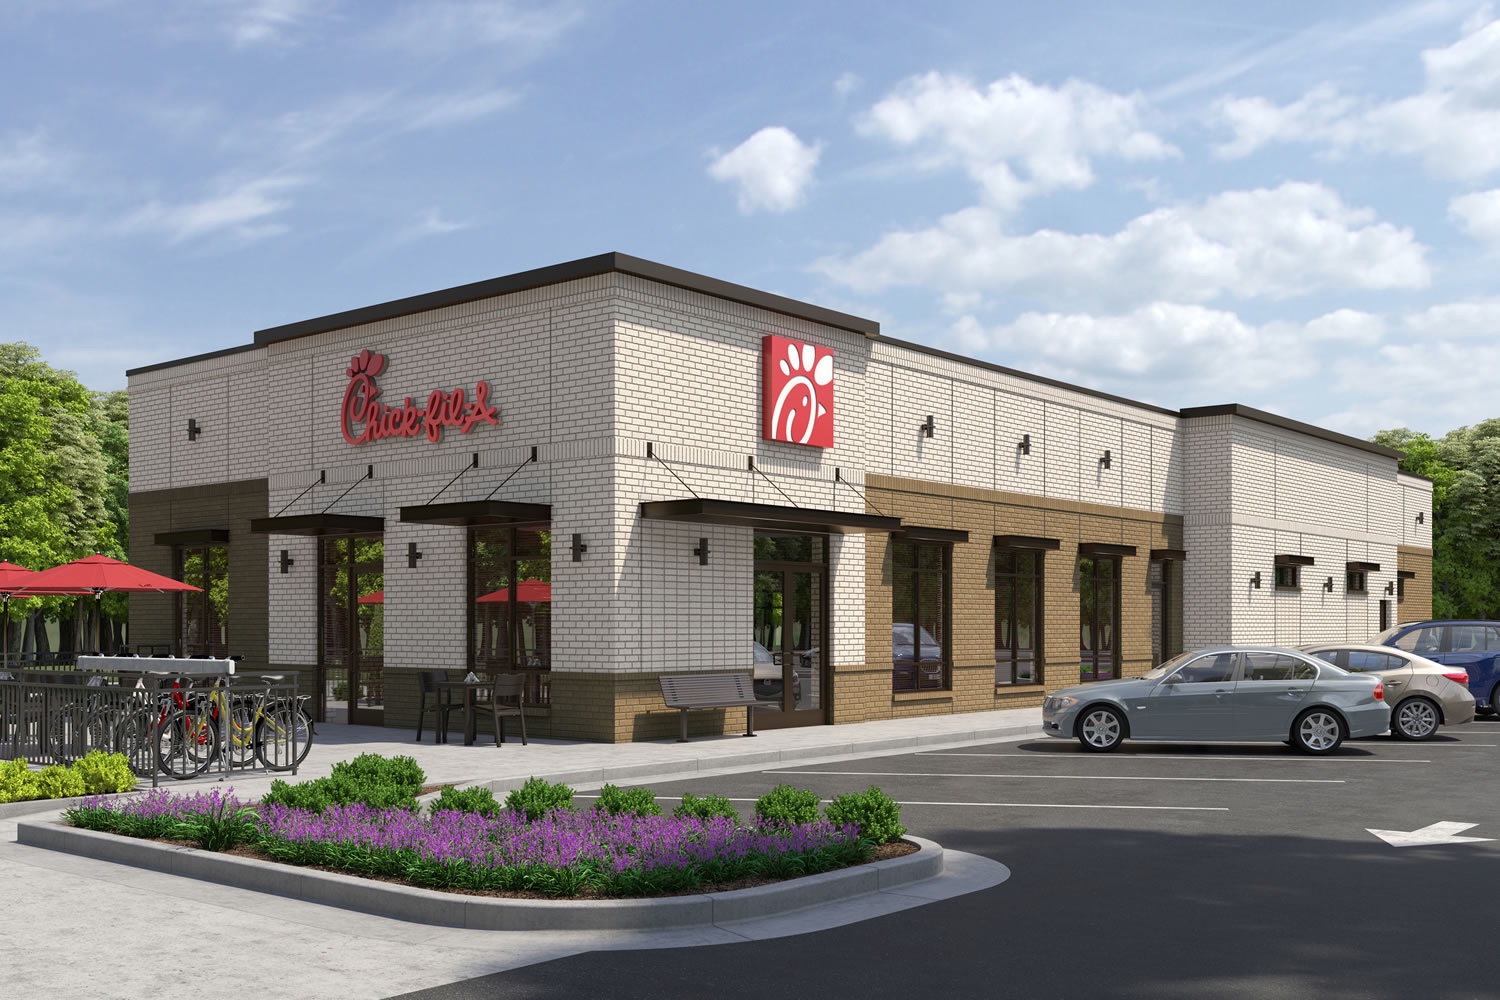 New Chick-fil-A Coming Soon to Opelousas, LA – Developing Lafayette